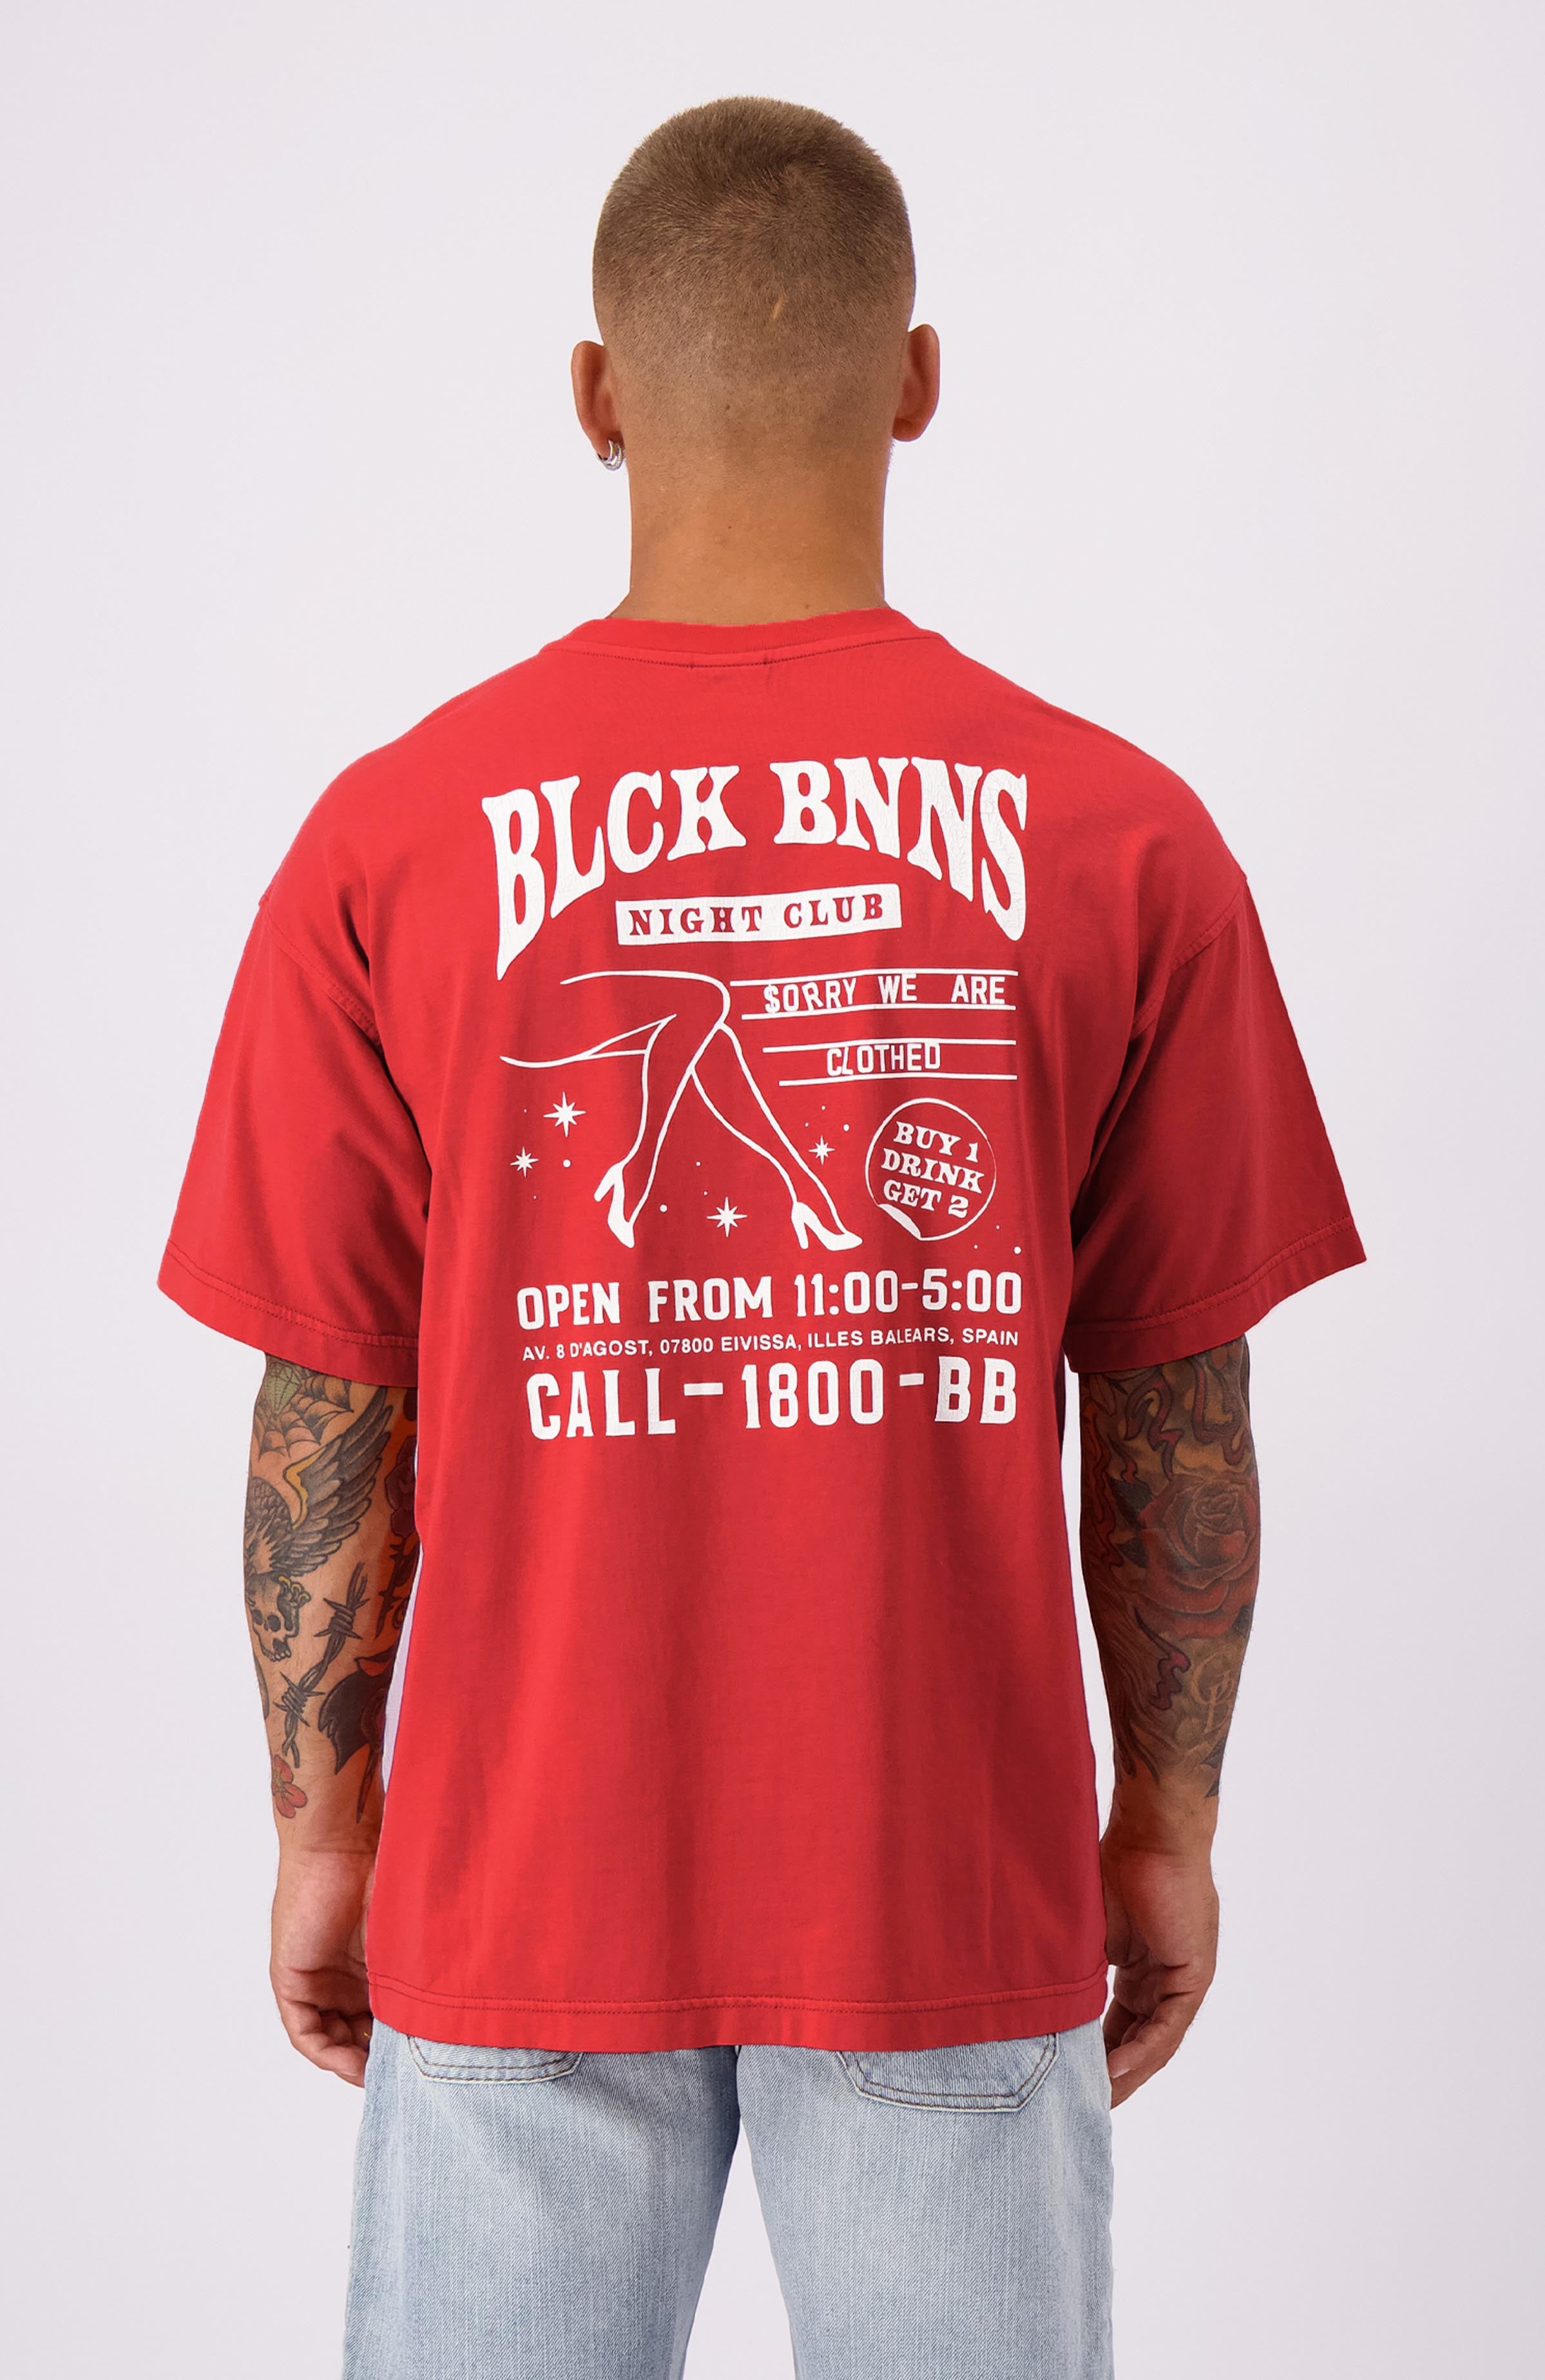 RED LIGHT TEE | Red